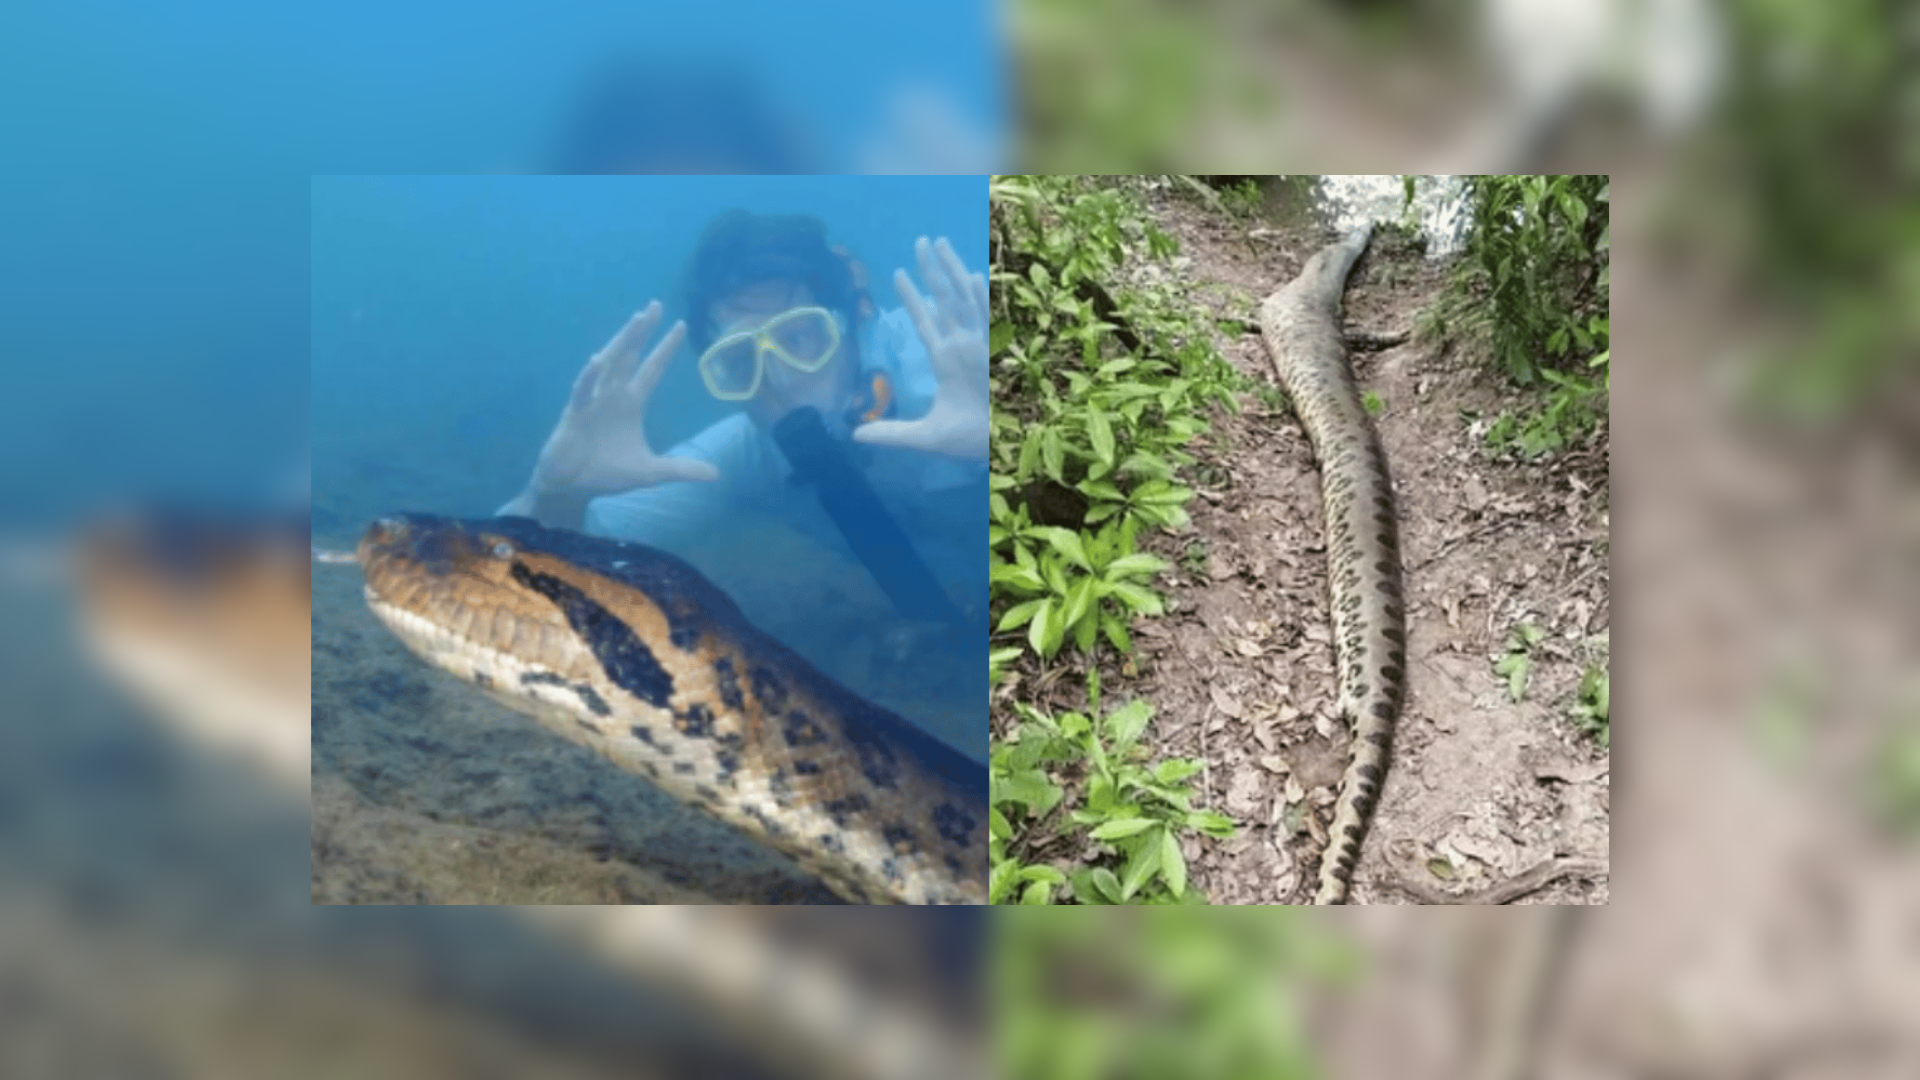 A Giant Falls: Ana Julia Worlds Largest Snake Found Dead In The Amazon Rainforest